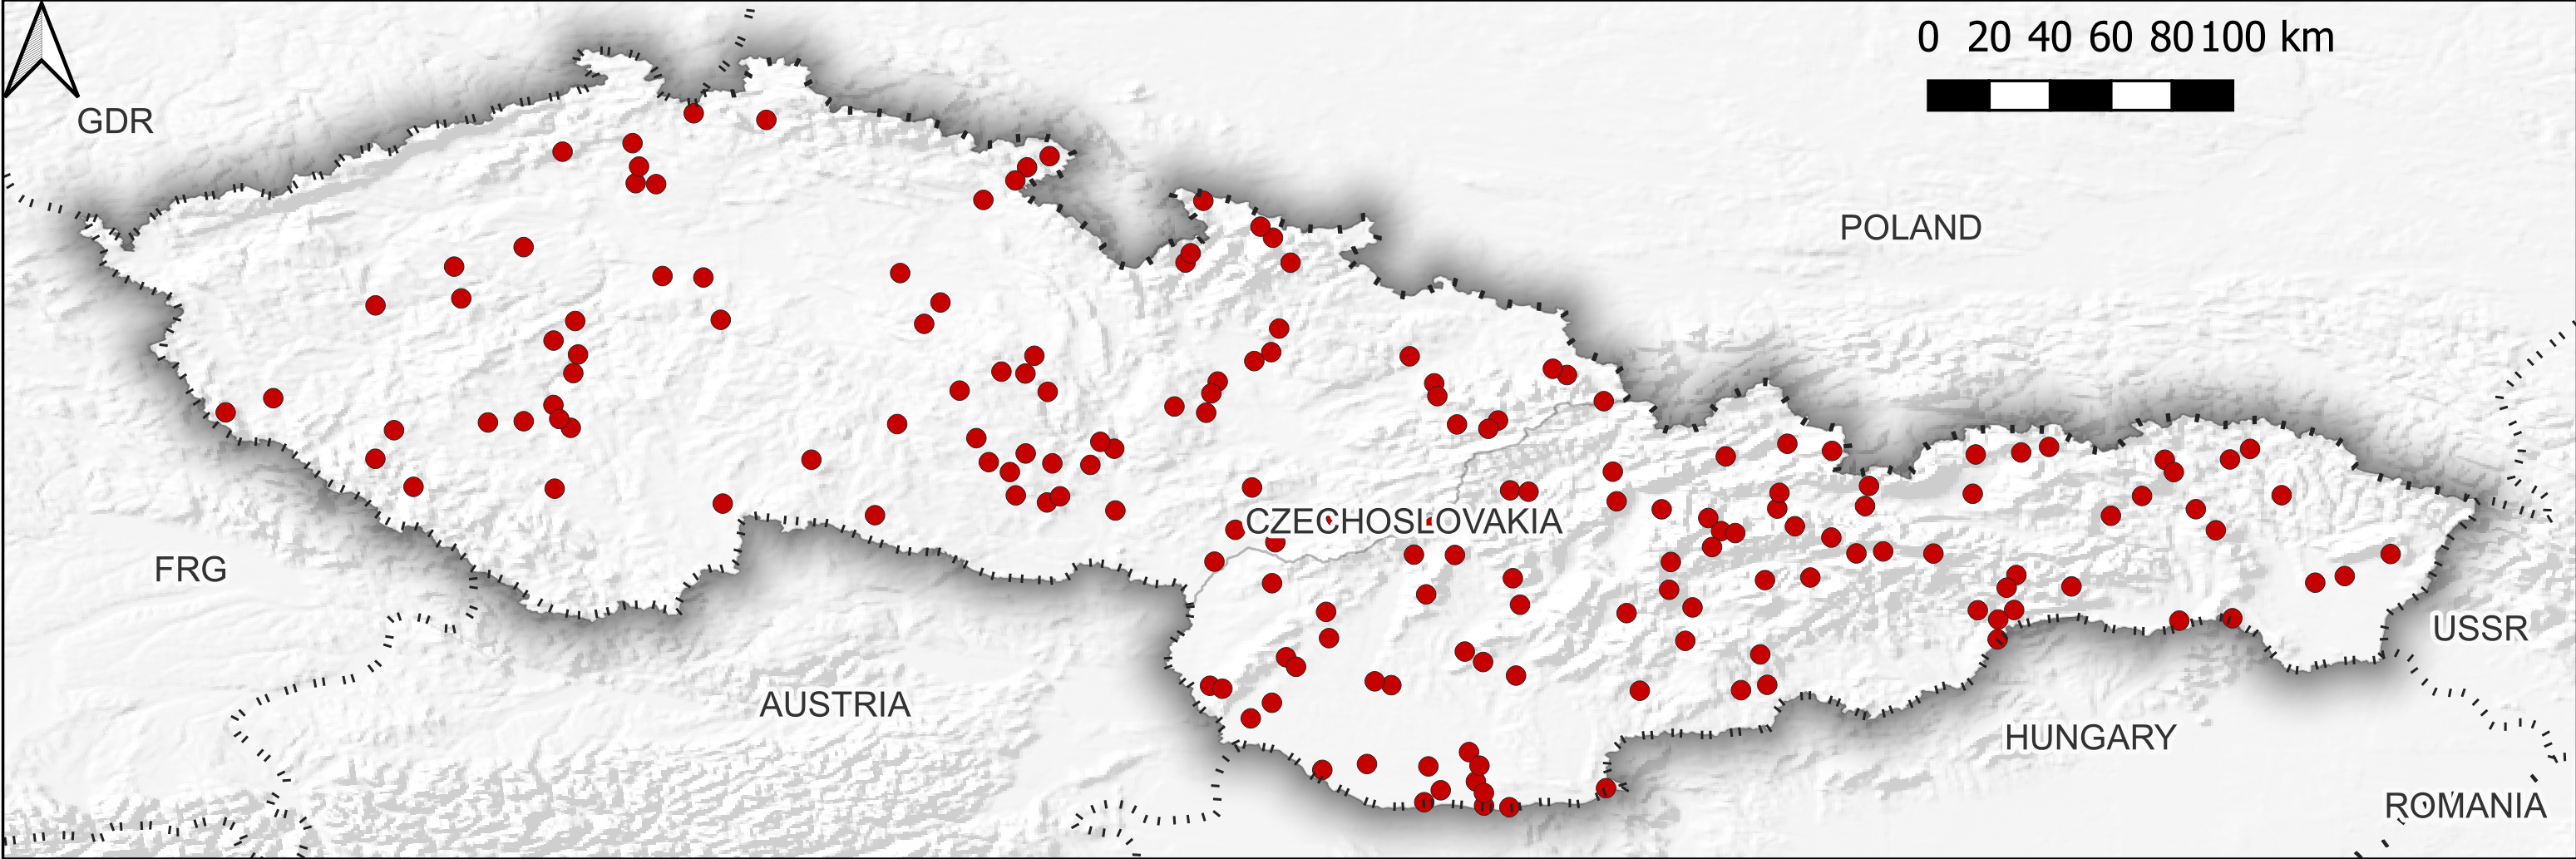 Map of Czechoslovakia with red dots